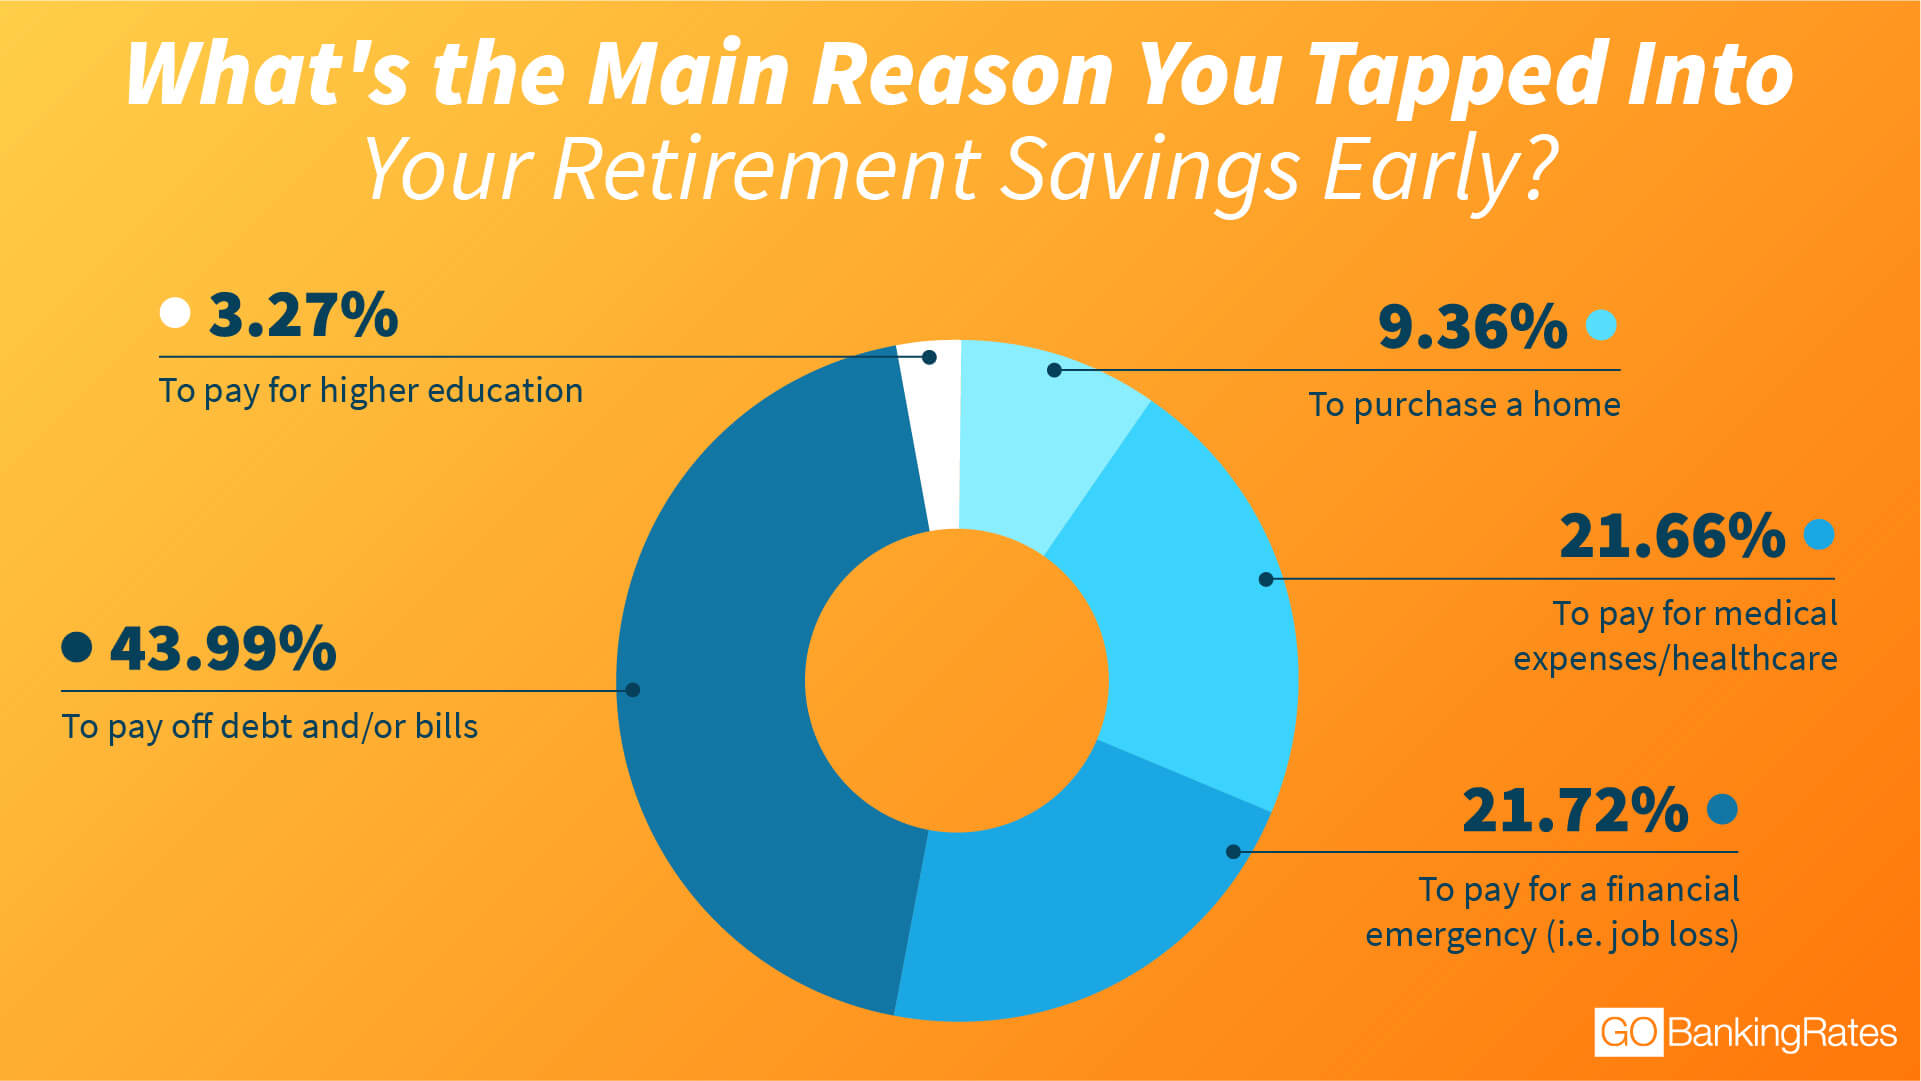 Here's Why 44 of Americans Tap Their Retirement Savings Early